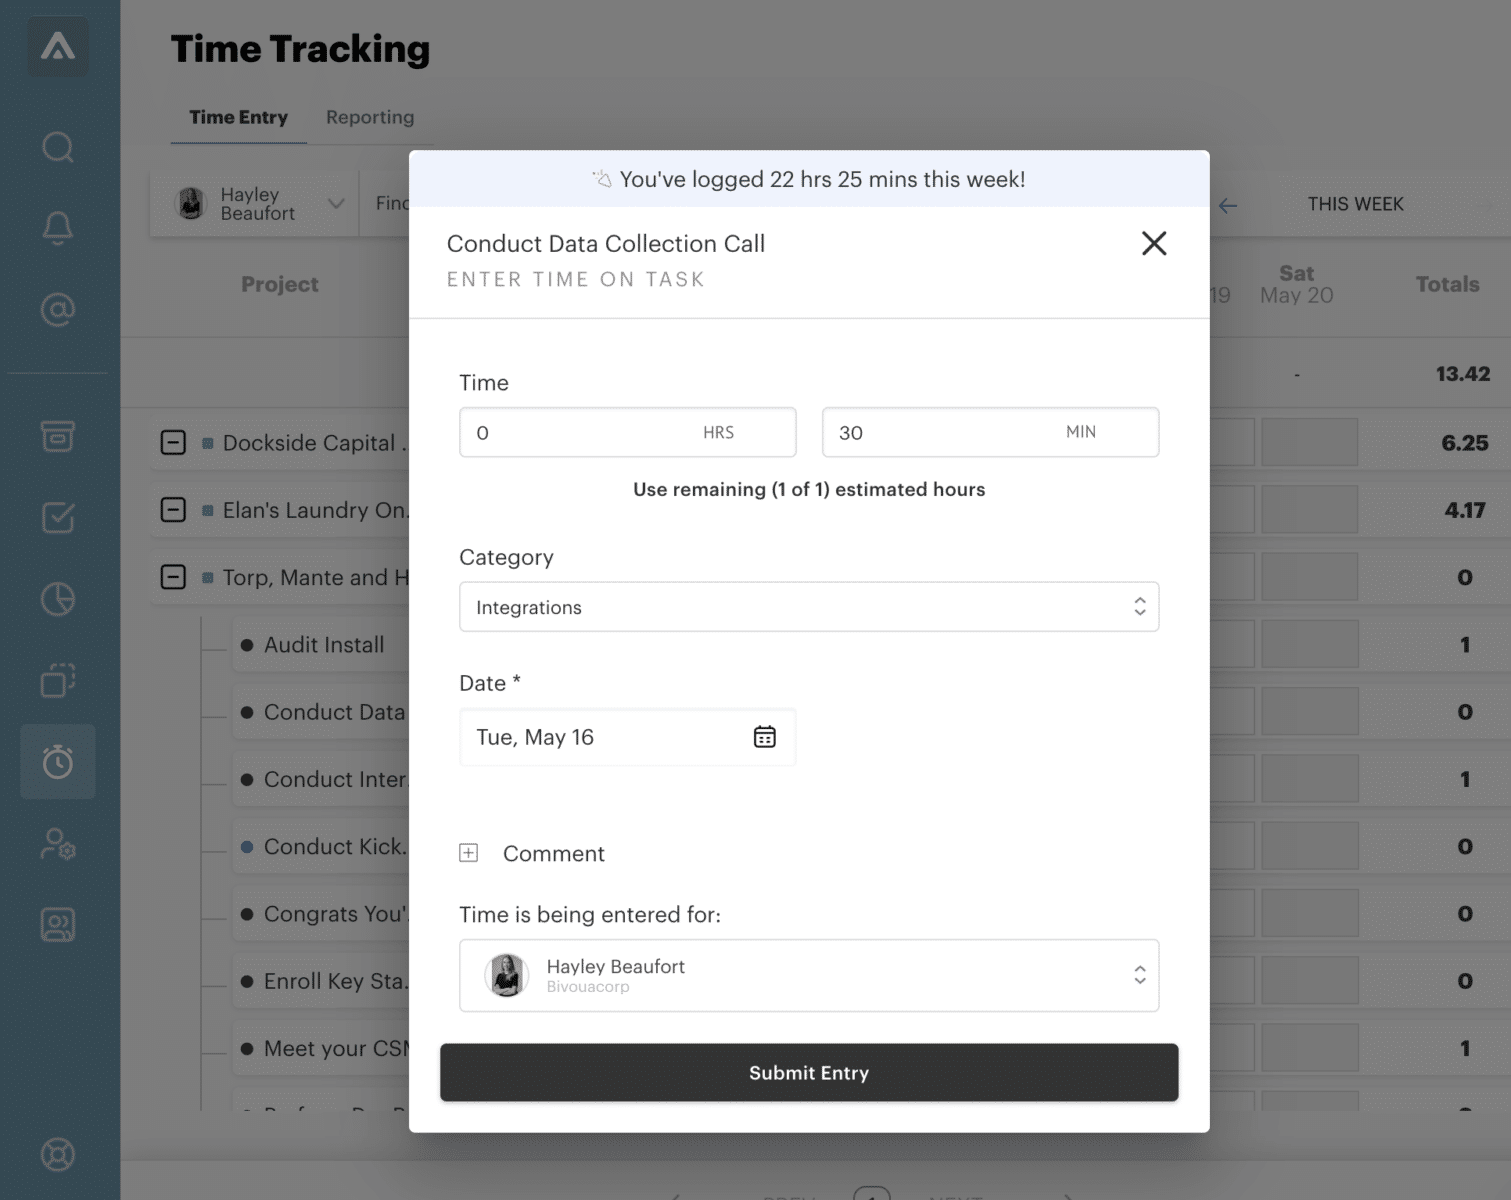 time tracking logging view inside the GUIDEcx platform. show a box to add hours and minutes, category, date and comments with a submit entry button